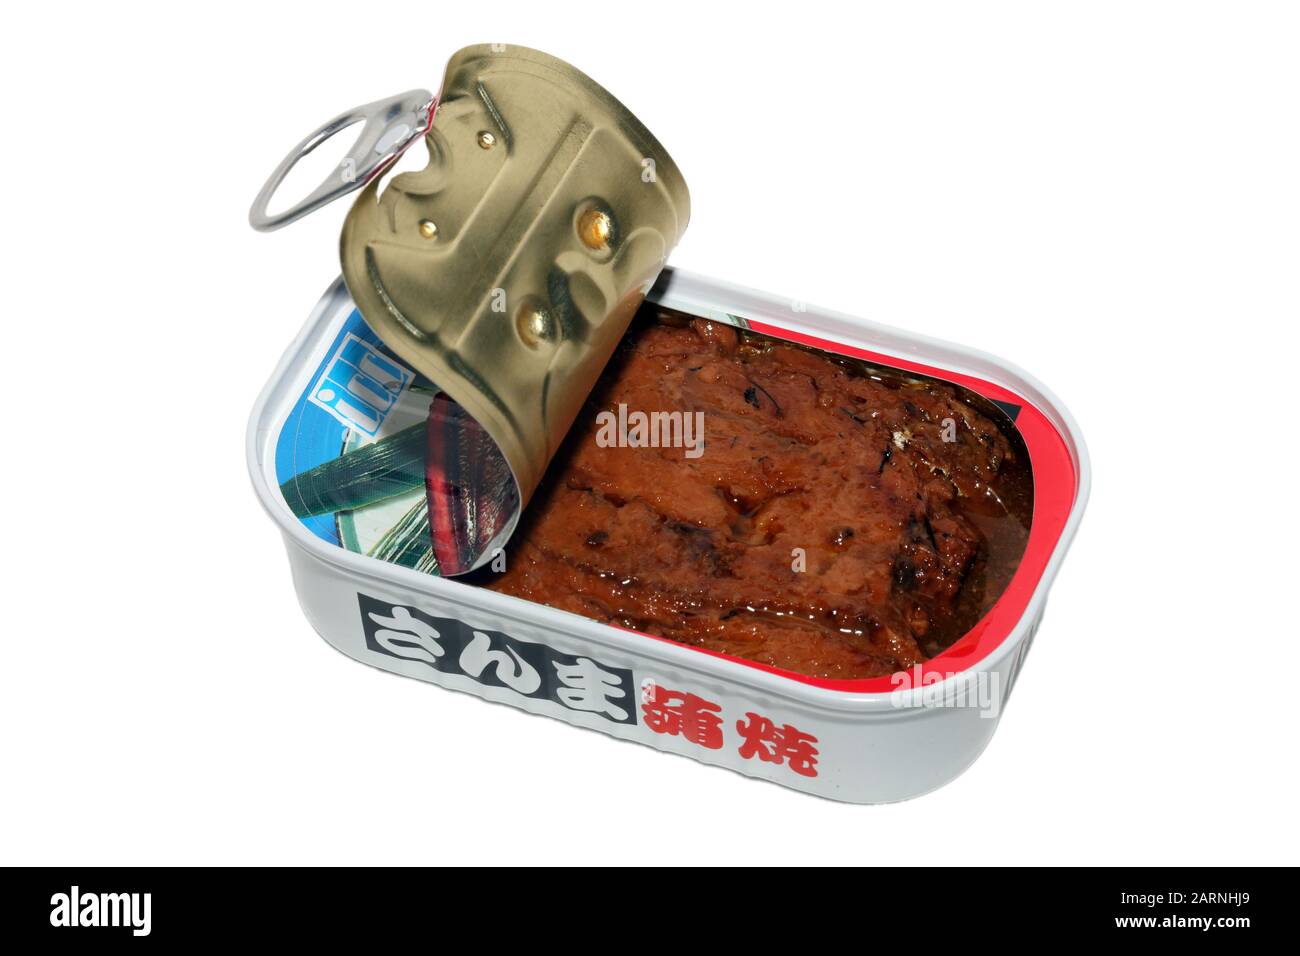 An opened can of ICC brand Sanma Kabayaki baked and seasoned saury (Cololabis saira) isolated on a white background. cutout image for editorial use. Stock Photo